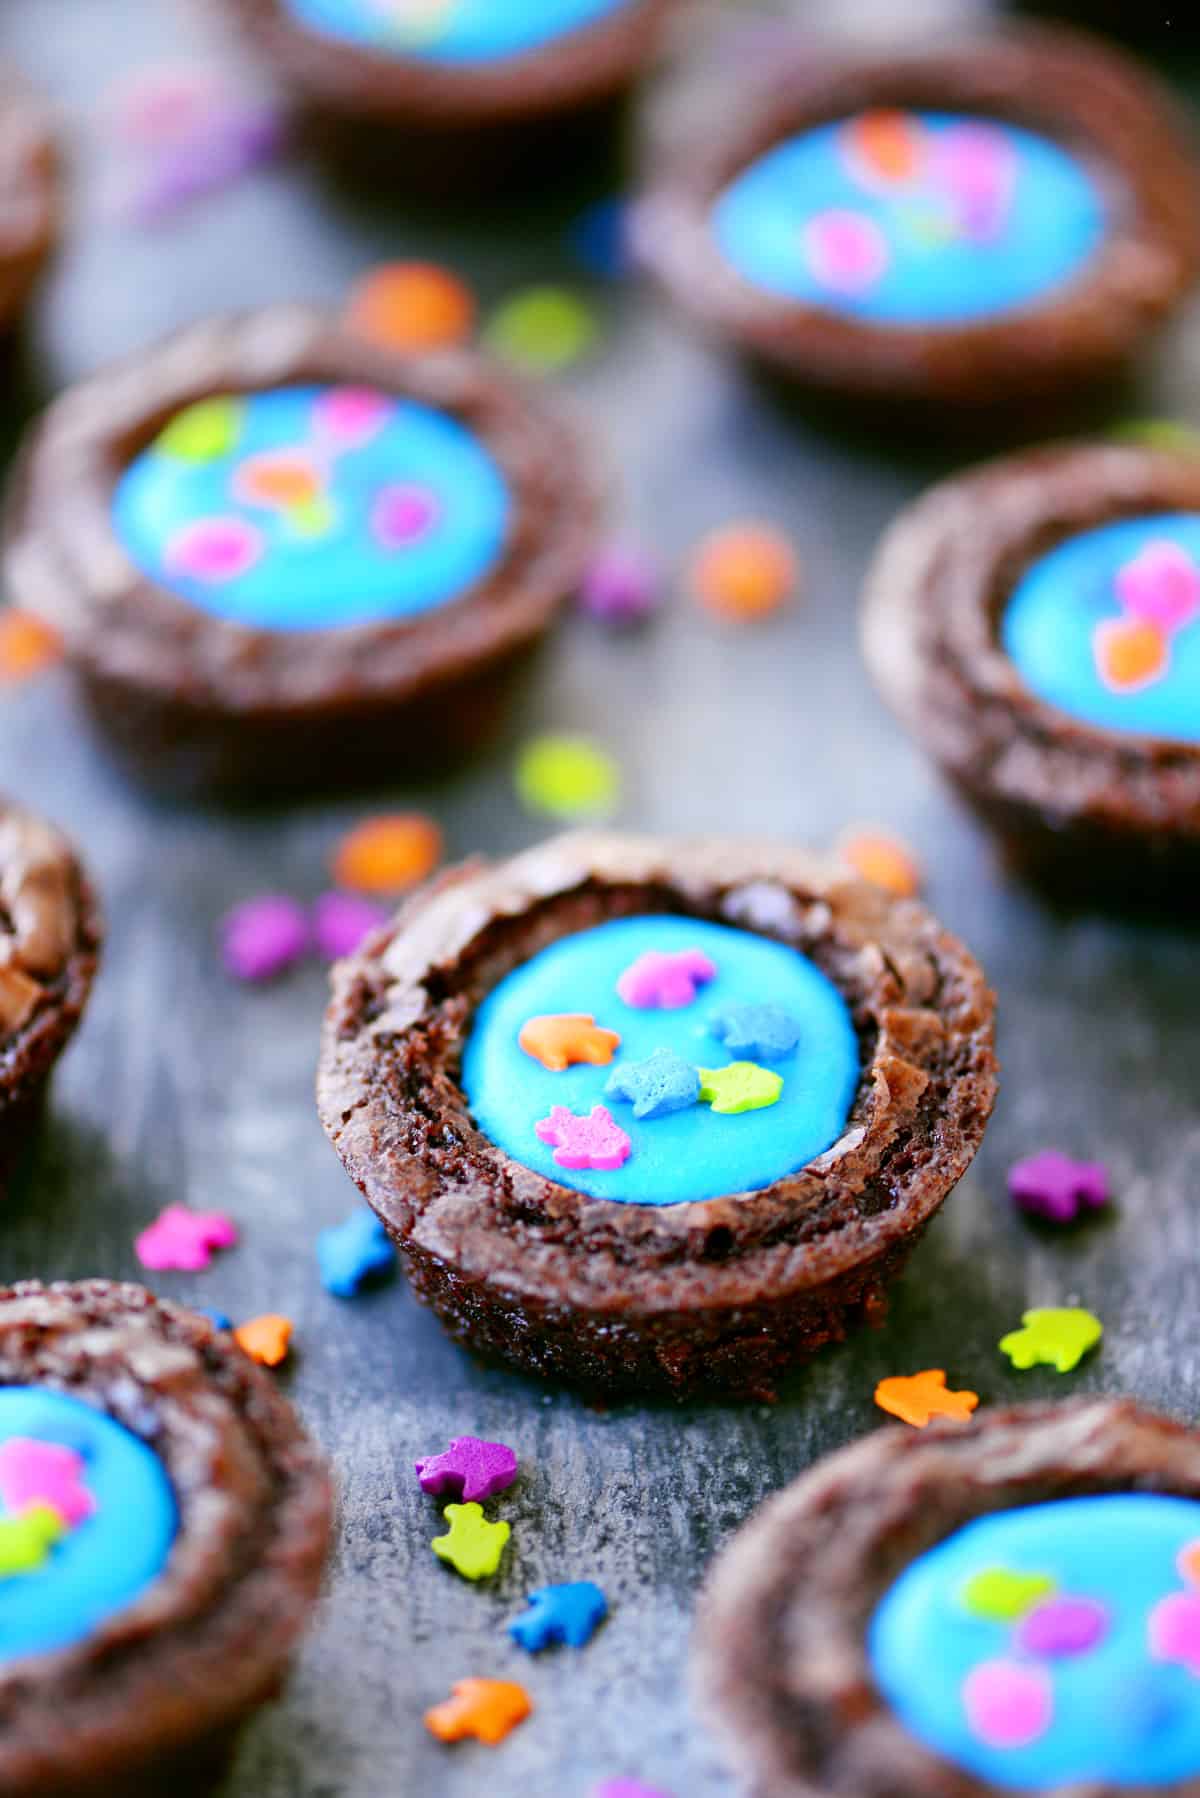 Brownie bites filled with blue frosting and fish sprinkles on top.